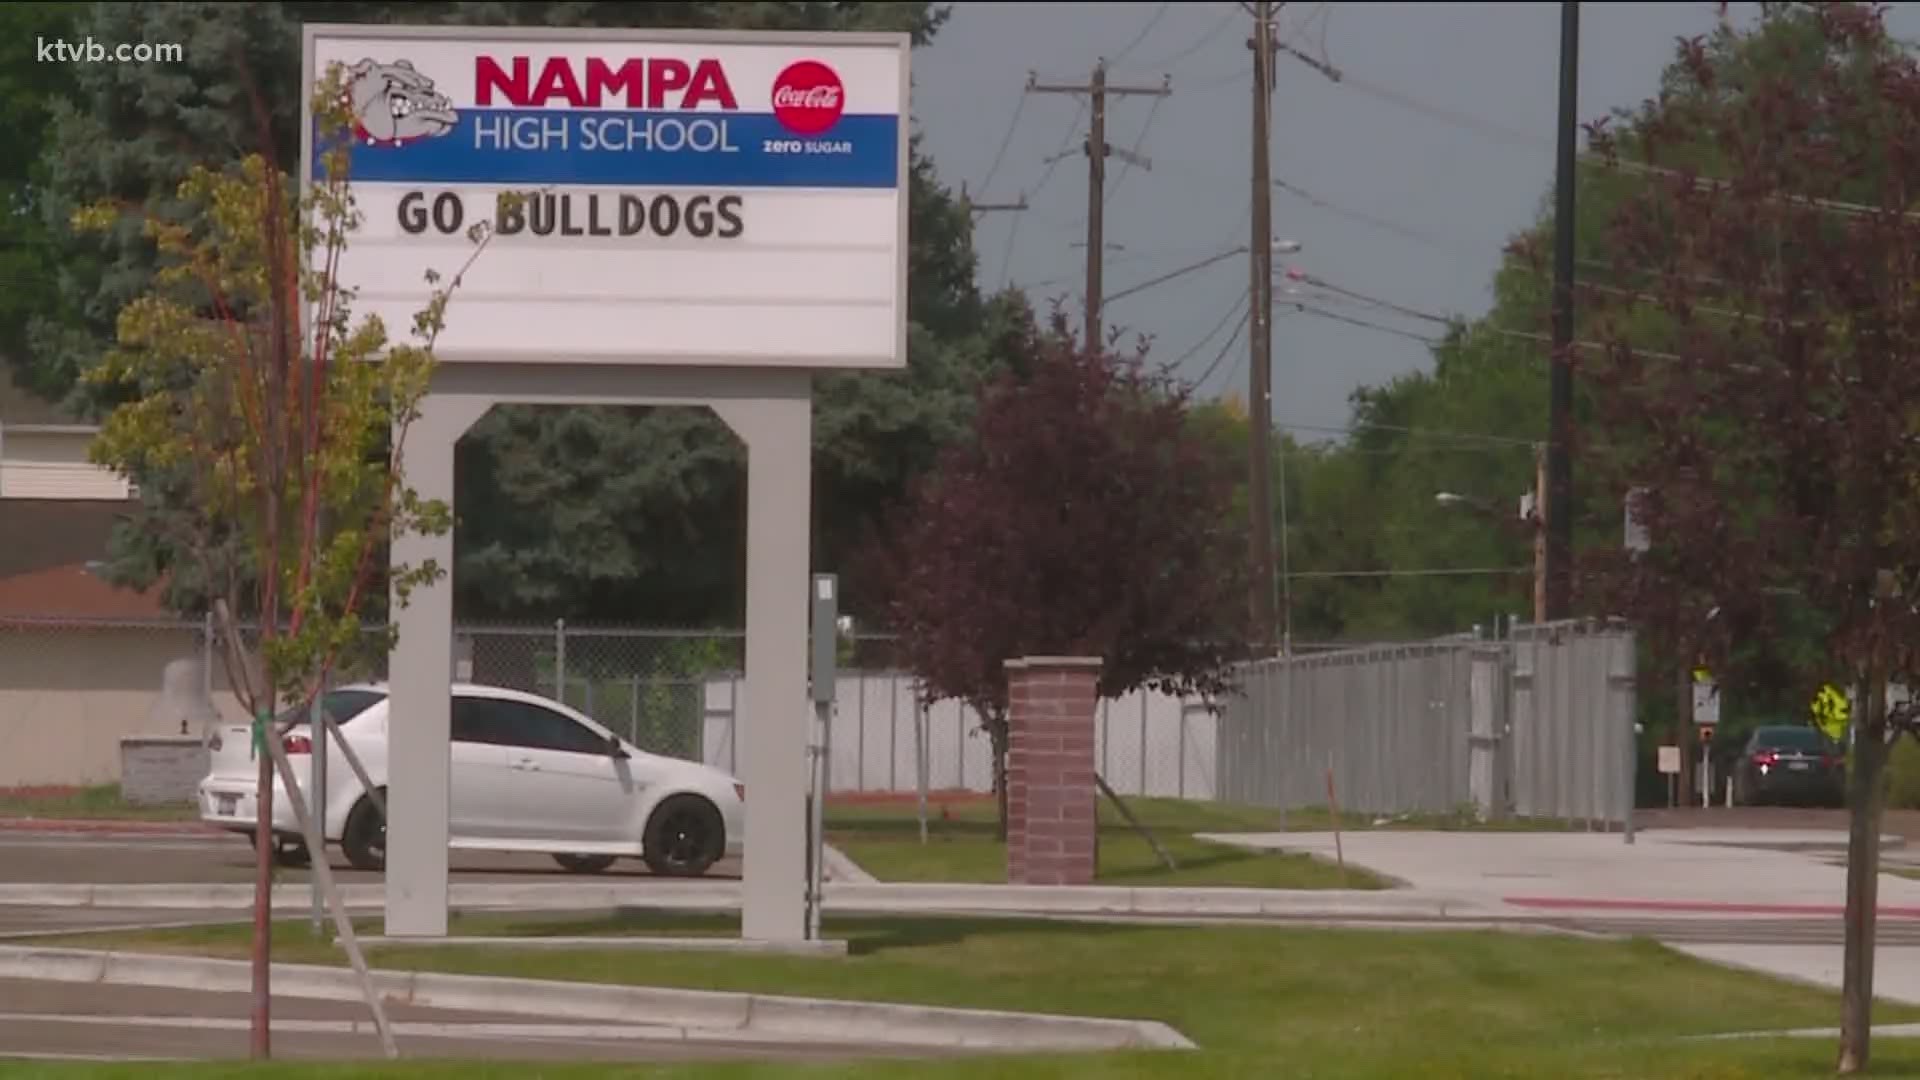 KTVB spoke with West Ada and Nampa School District officials to find out what their plans are.